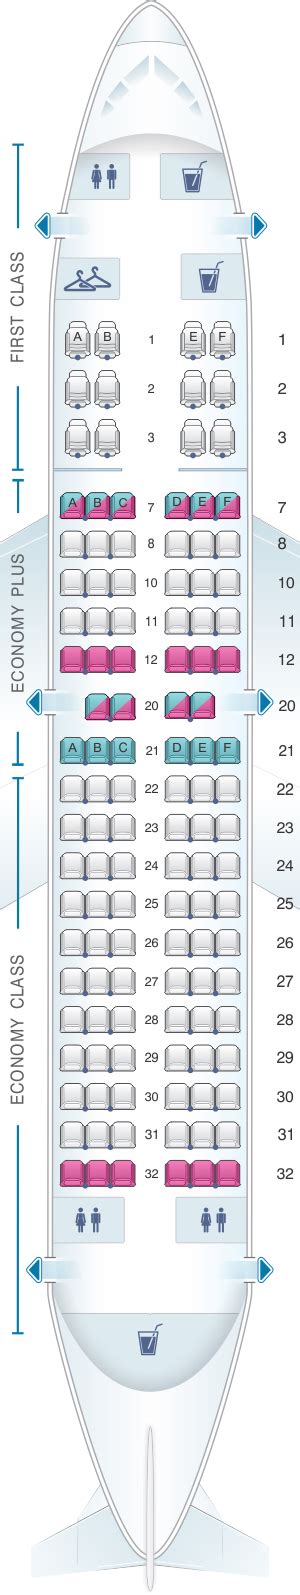 Wayne Slezak/Courtesy of United Airlines. While some of the Boeing 737-700 aircrafts are still in service, many of the newer planes are missing row 33 in order for the seat map to end in row 40.. 